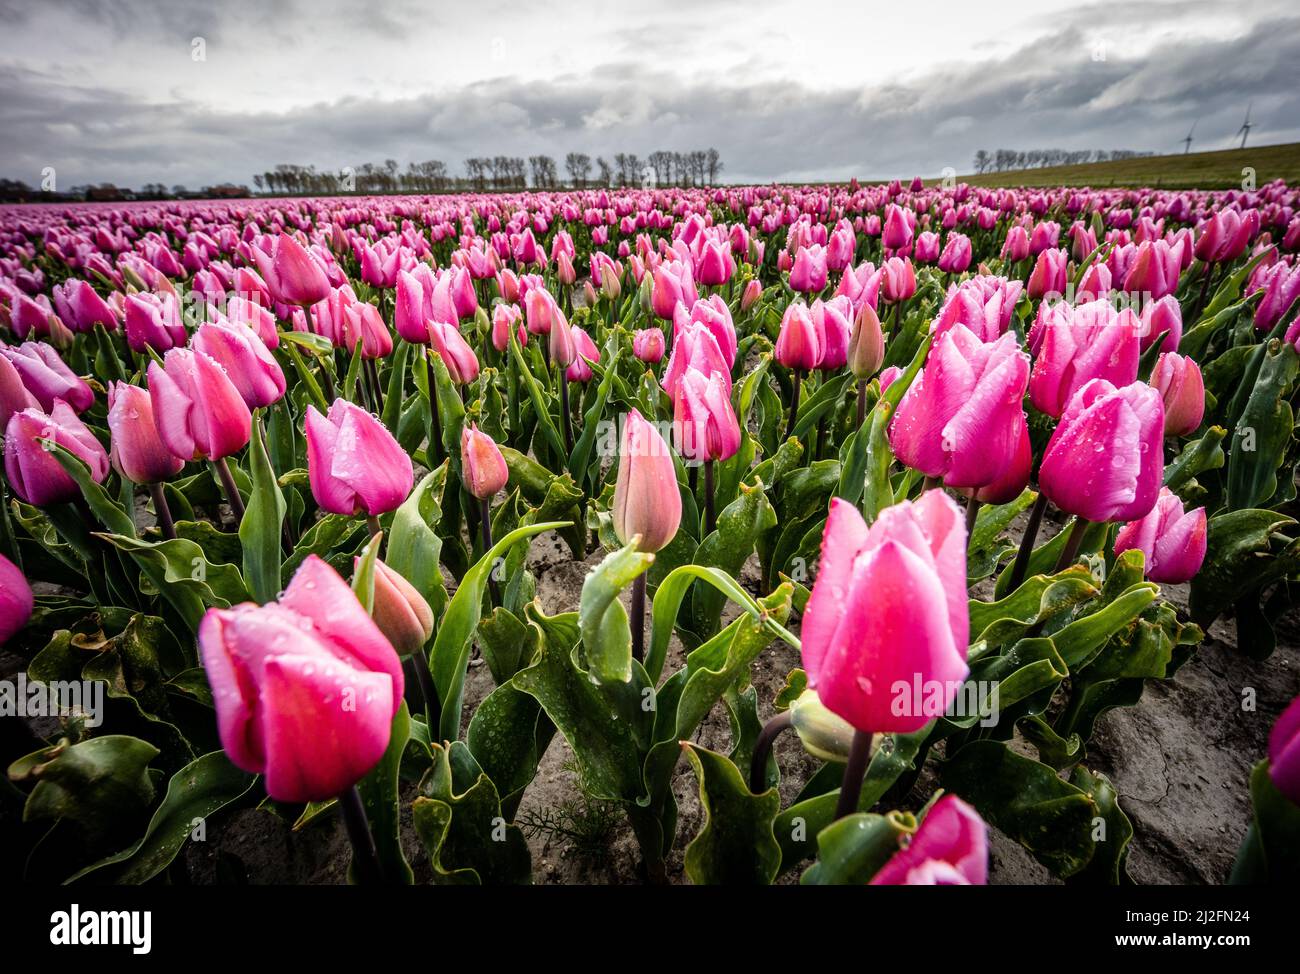 2022-03-31 08:12:00 31-03-2022, Zuid-Beijerland - Tulip fields in bloom on a field in Zuid-Beijerland. The tulips bloom early this year due to the beautiful sunny weather. Photo: ANP / Hollandse Hoogte / Jeffrey Groeneweg netherlands out - belgium out Stock Photo